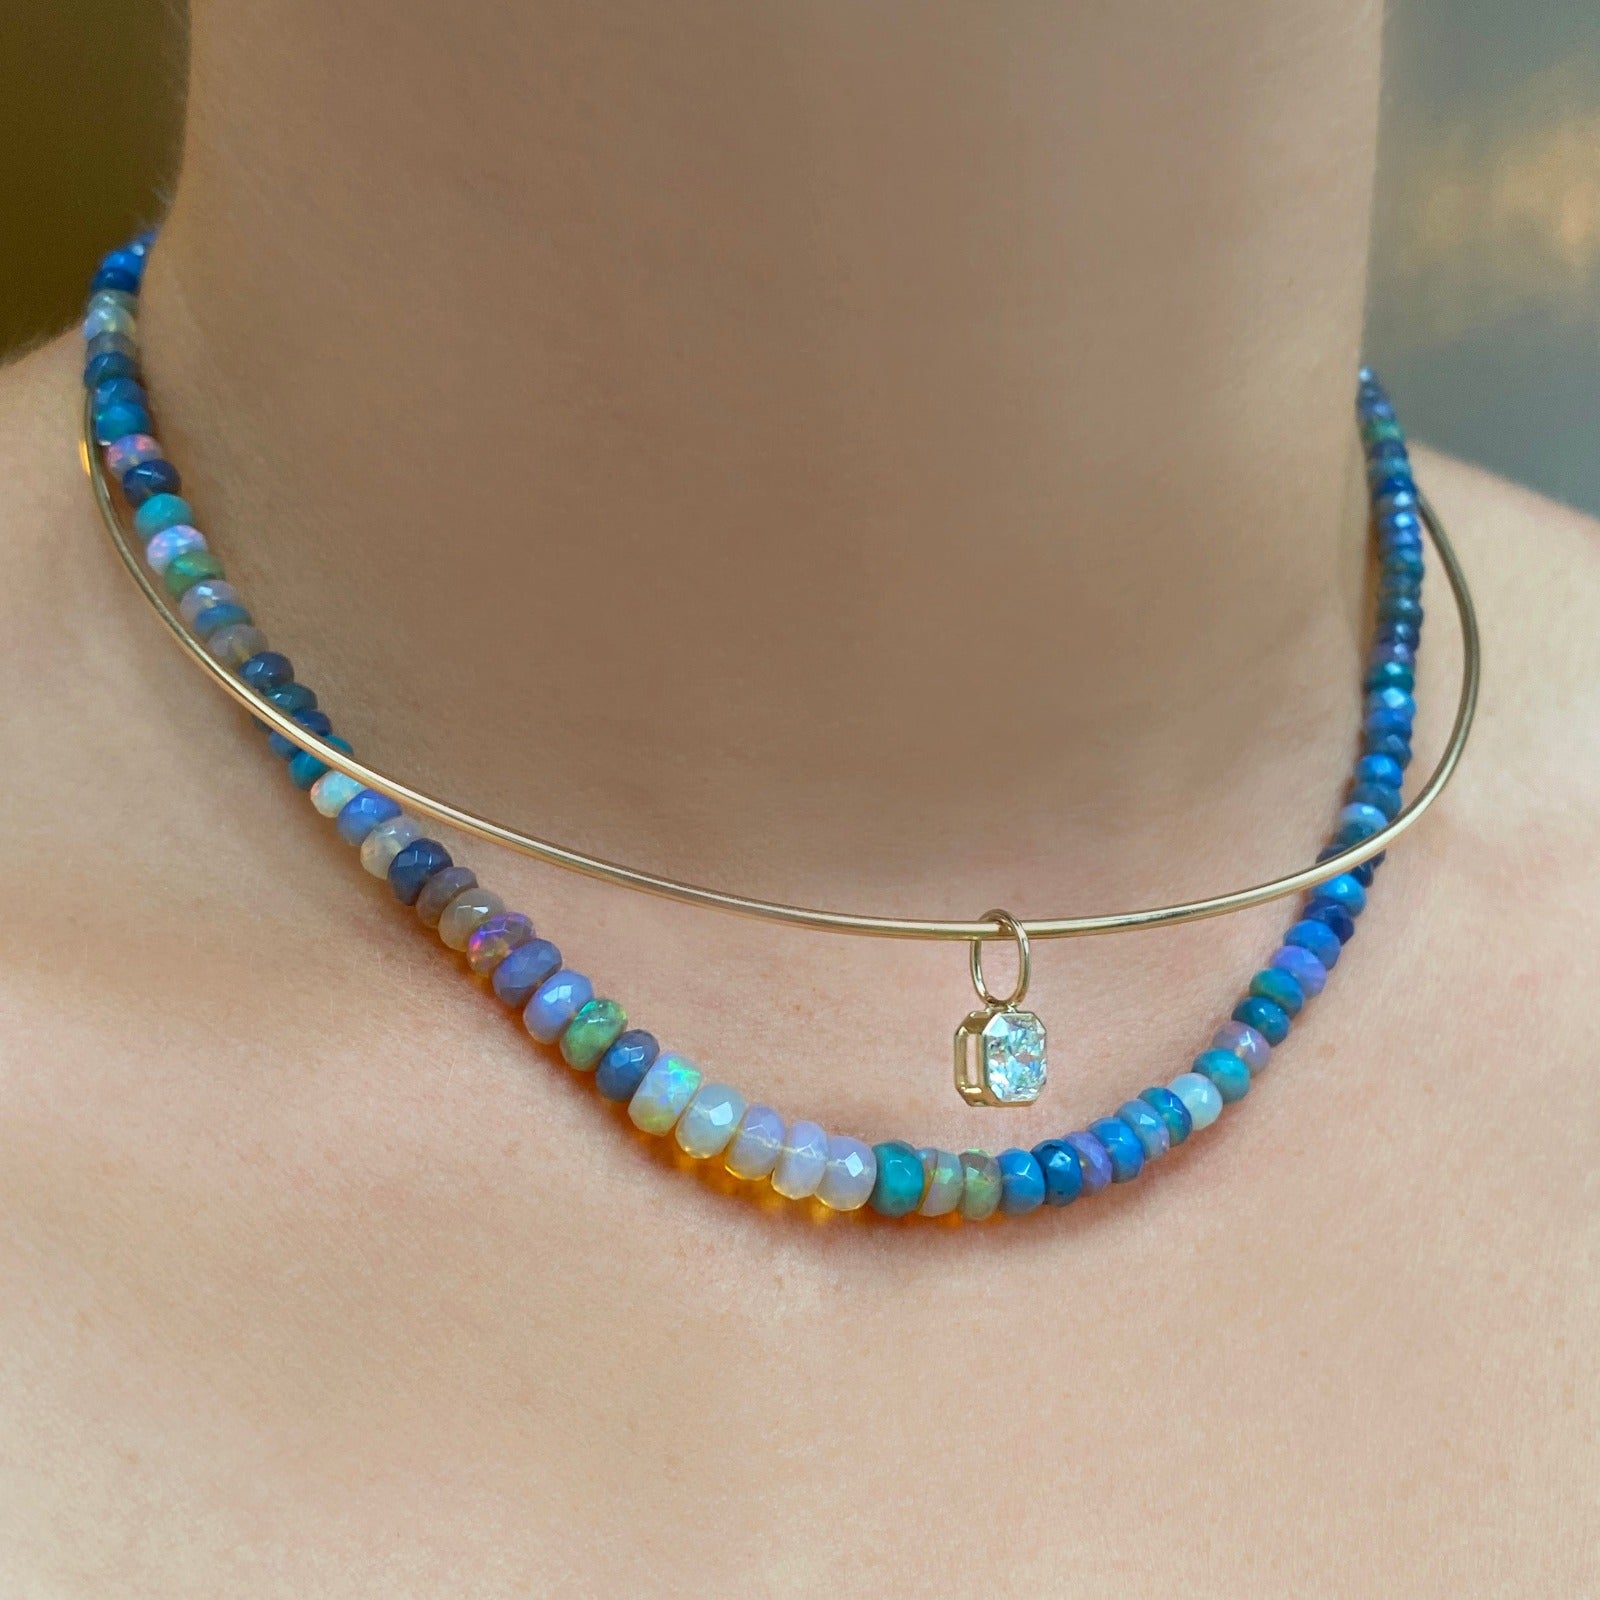 Shimmering beaded necklace made of faceted opals in shades of light blue, light purple, yellow, white, and clear on a gold linking ovals clasp. Styled on a neck with the wire choker necklace and aquila cut diamond solitaire charm.